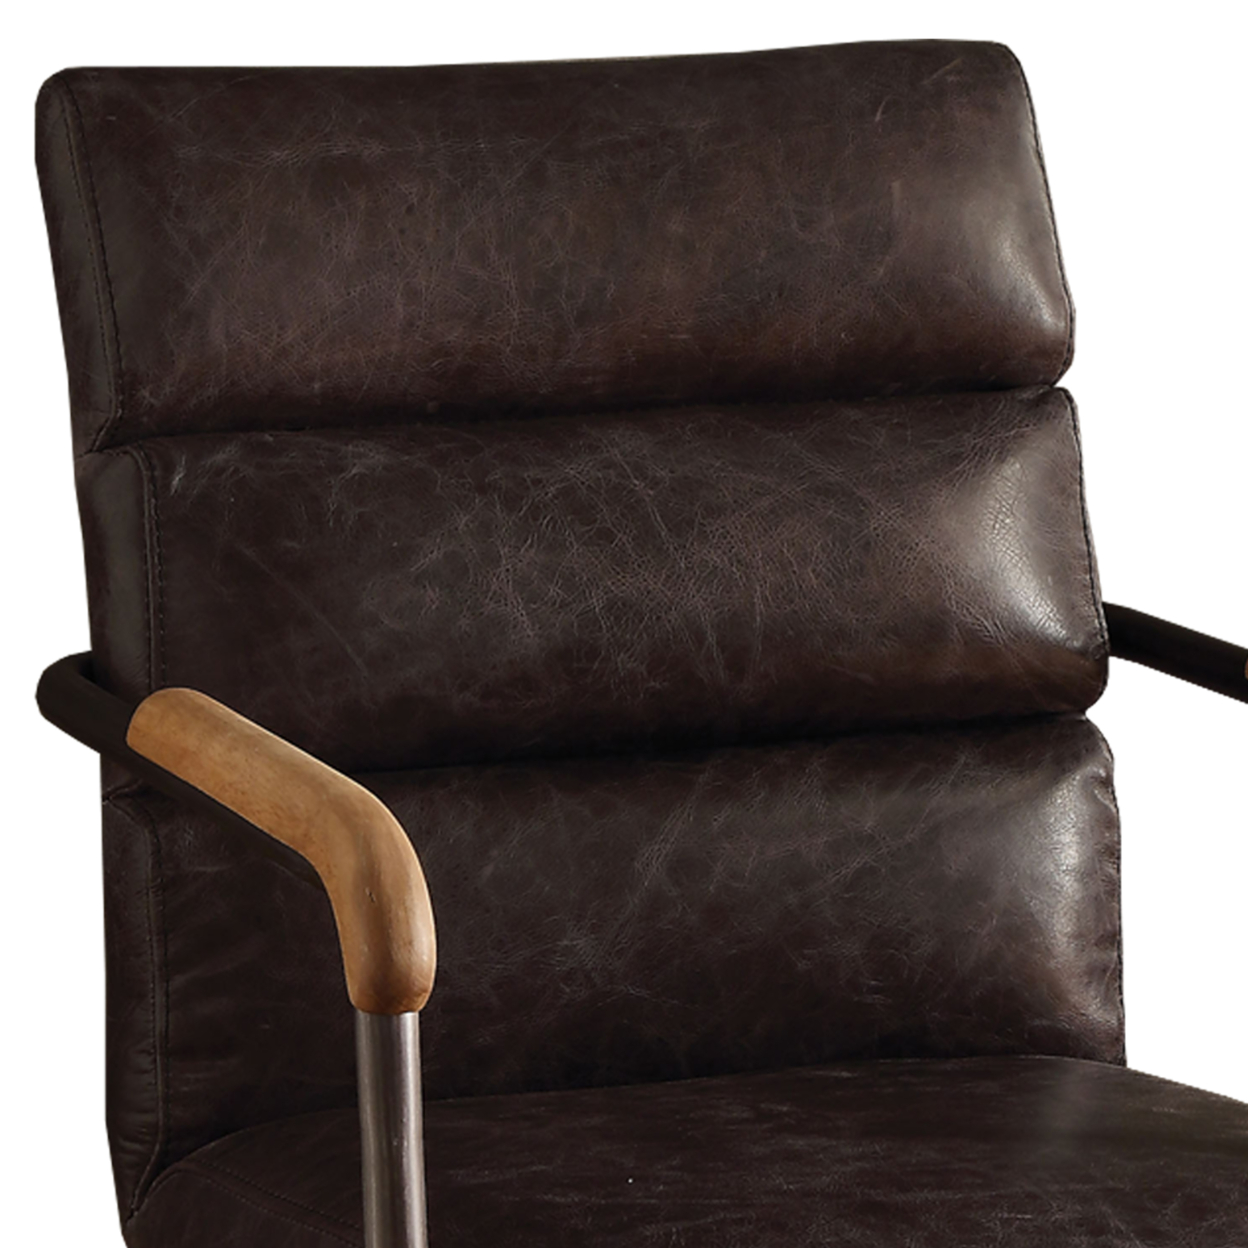 Metal & Leather Executive Office Chair, Antique Brown- Saltoro Sherpi